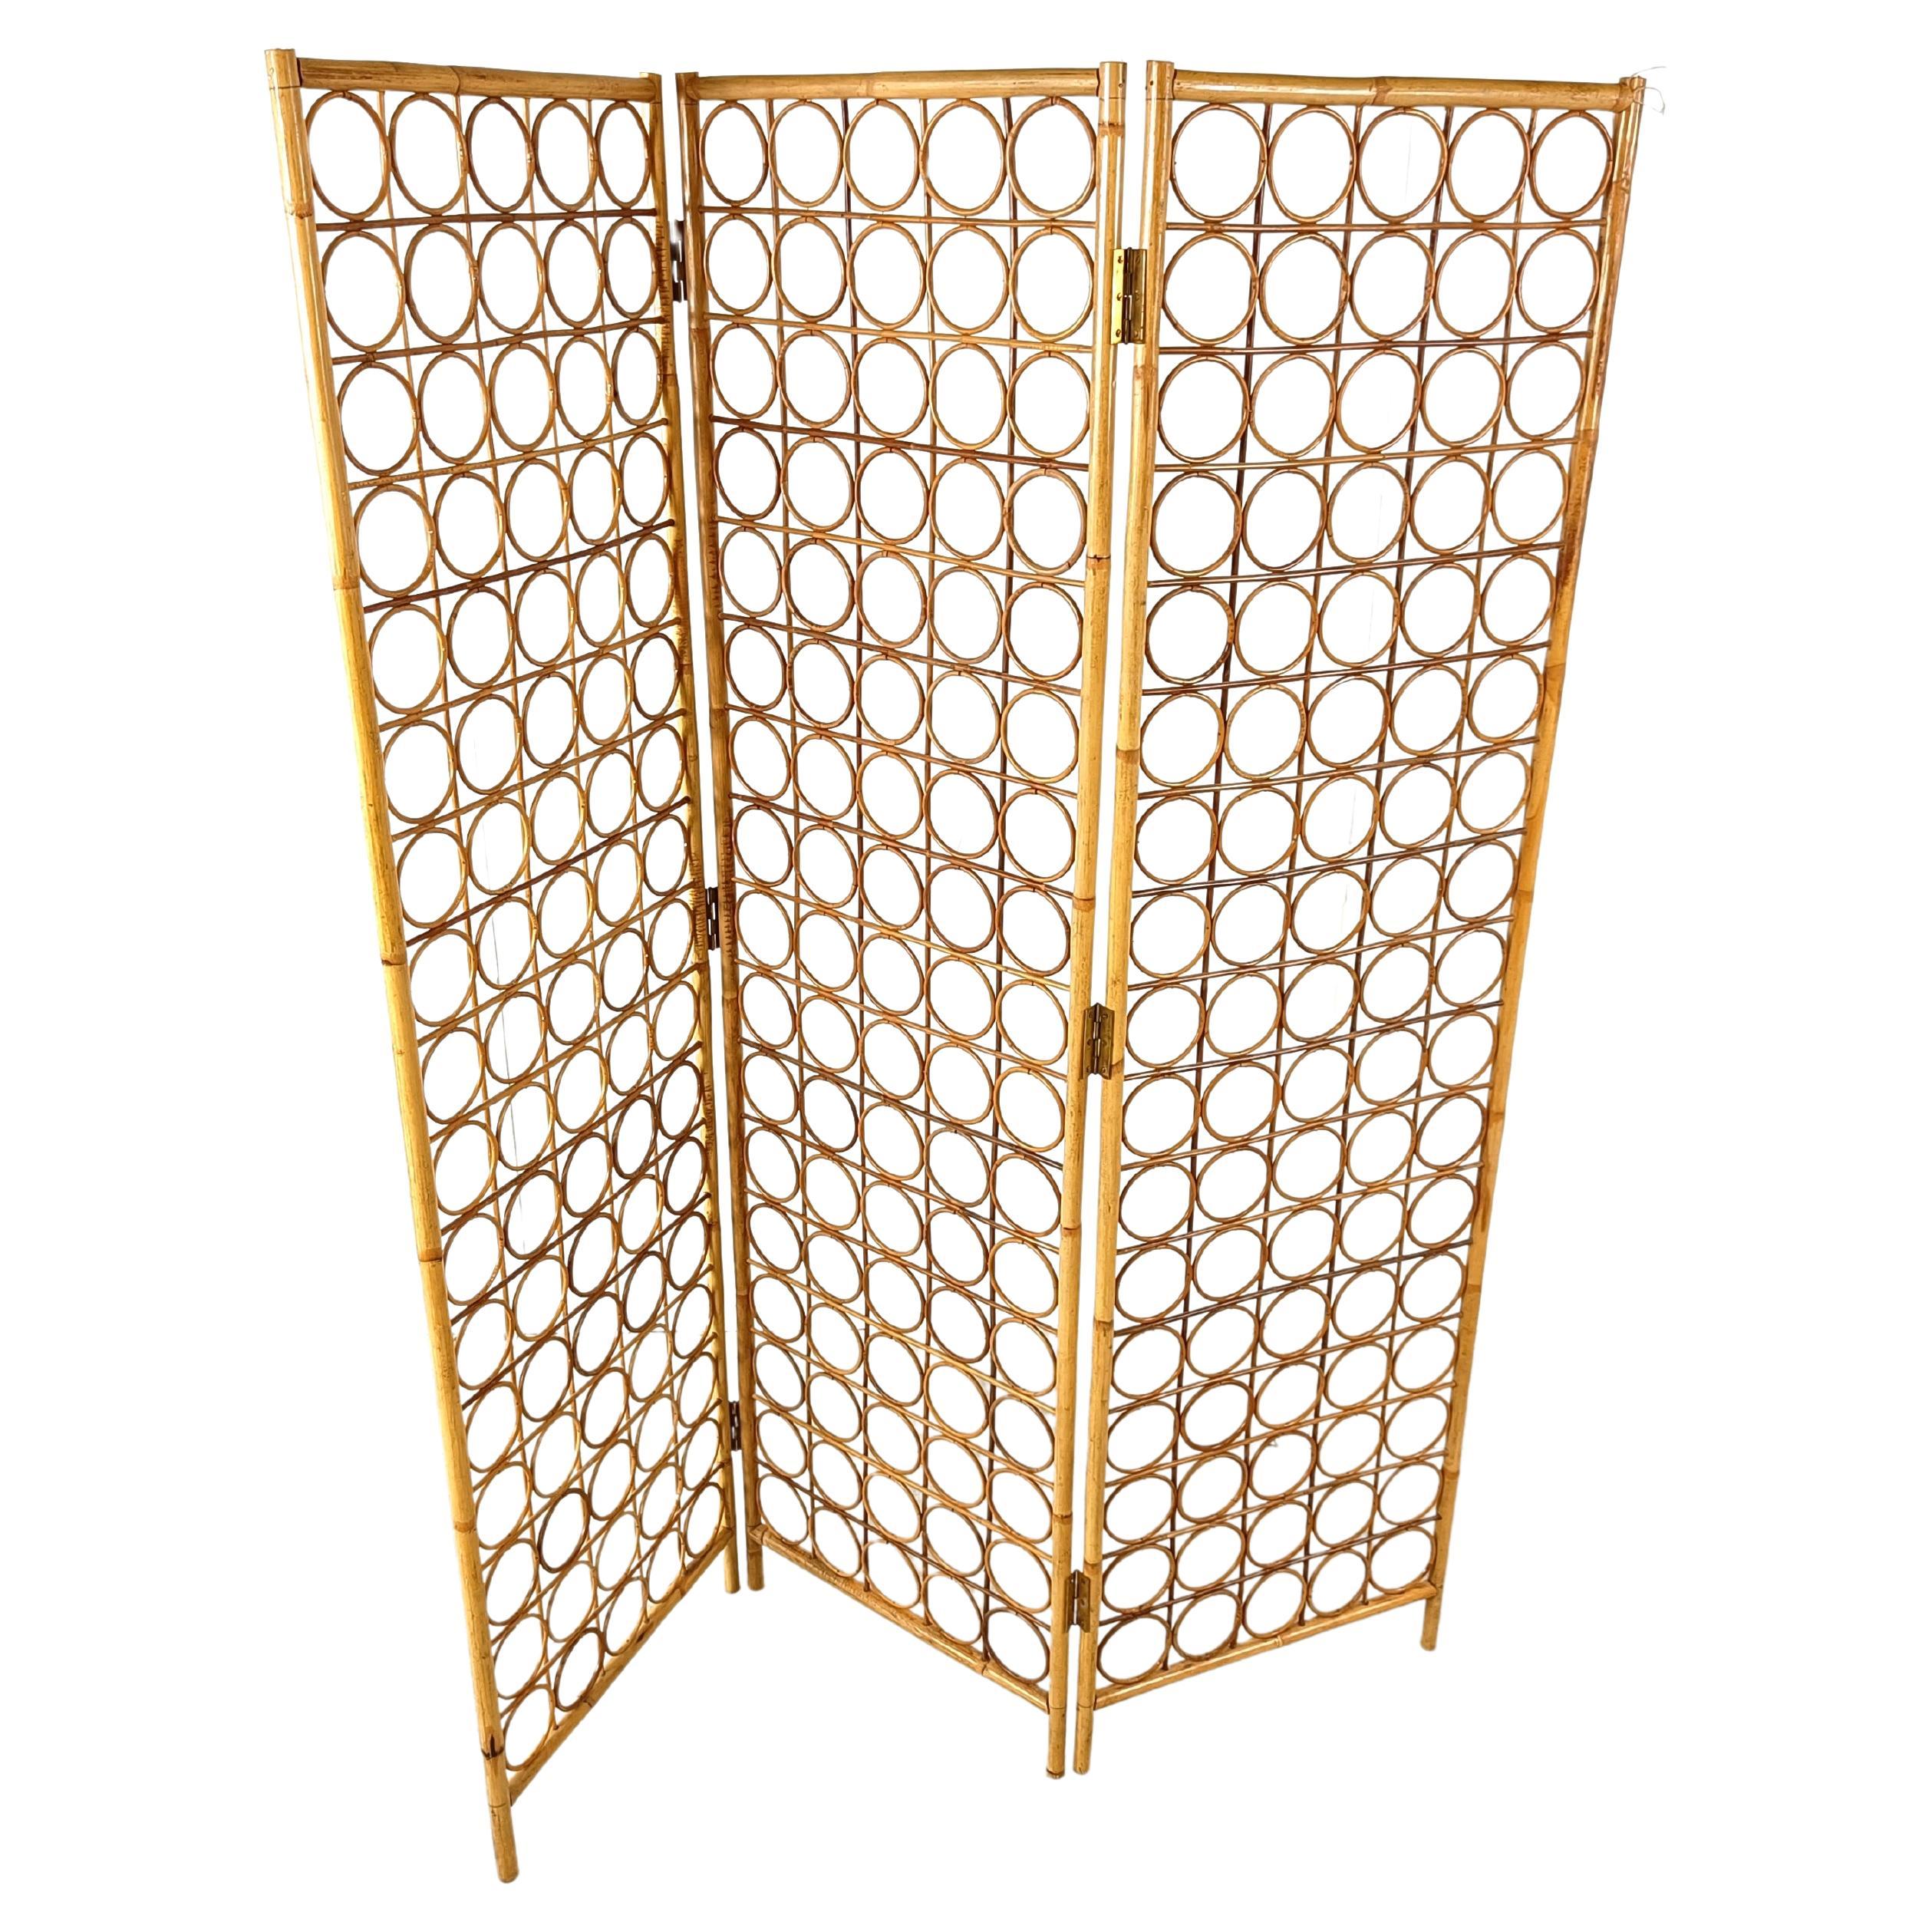 Bamboo room divider or folding screen, 1970s